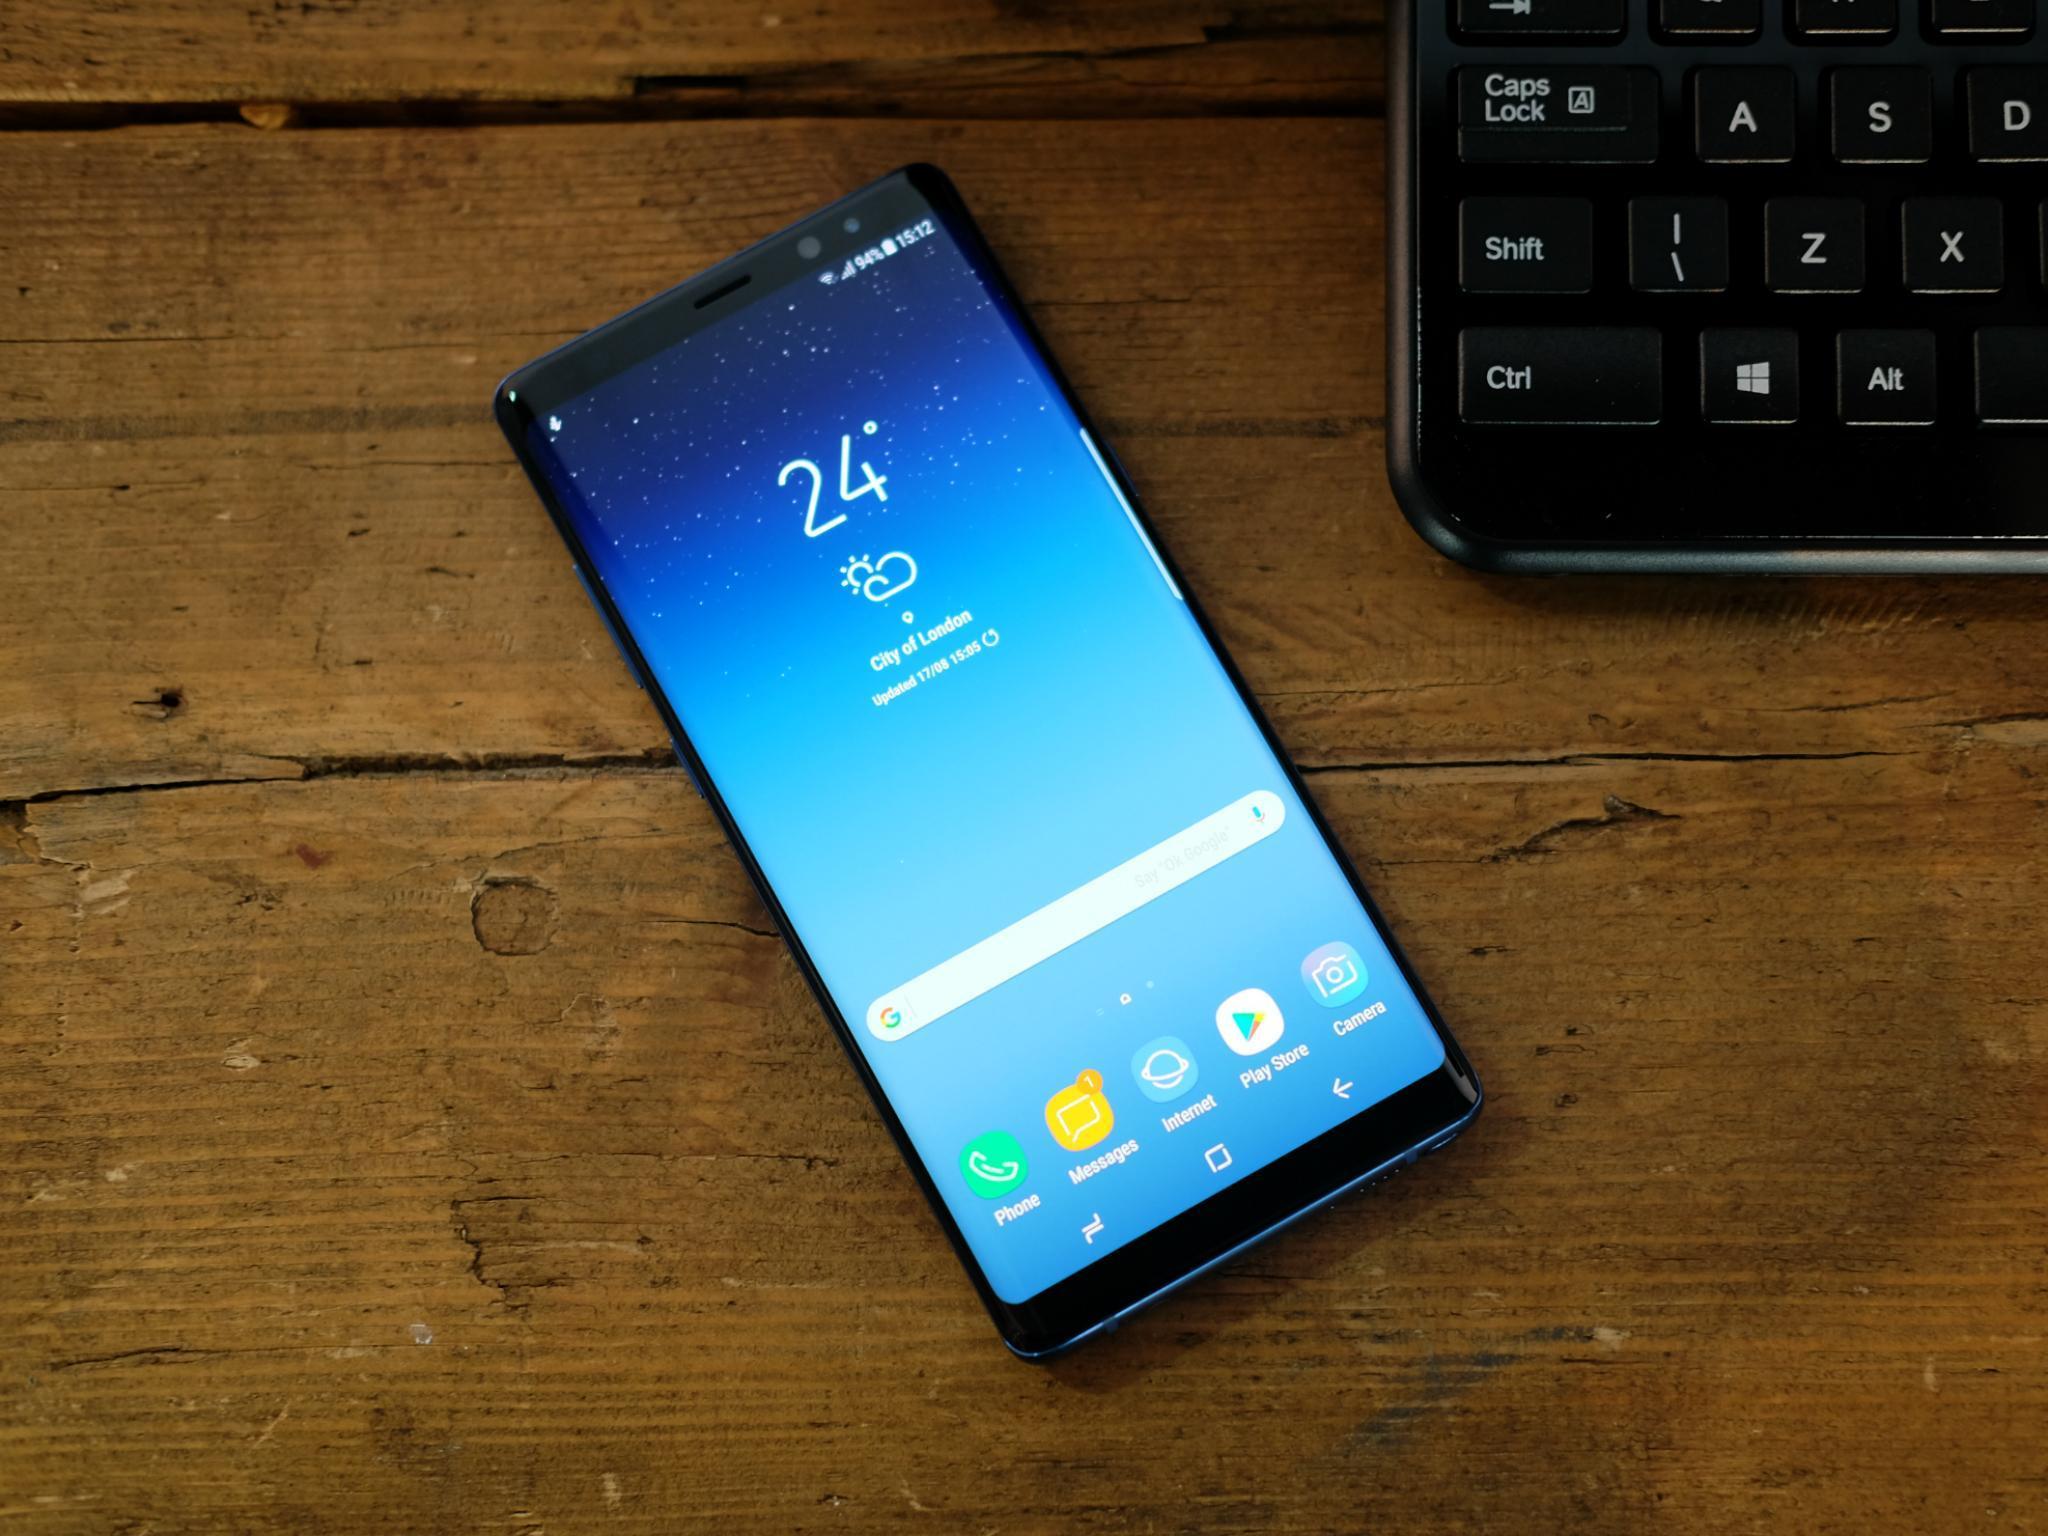 If you're a big fan of large phones, the Note 8 is a belter